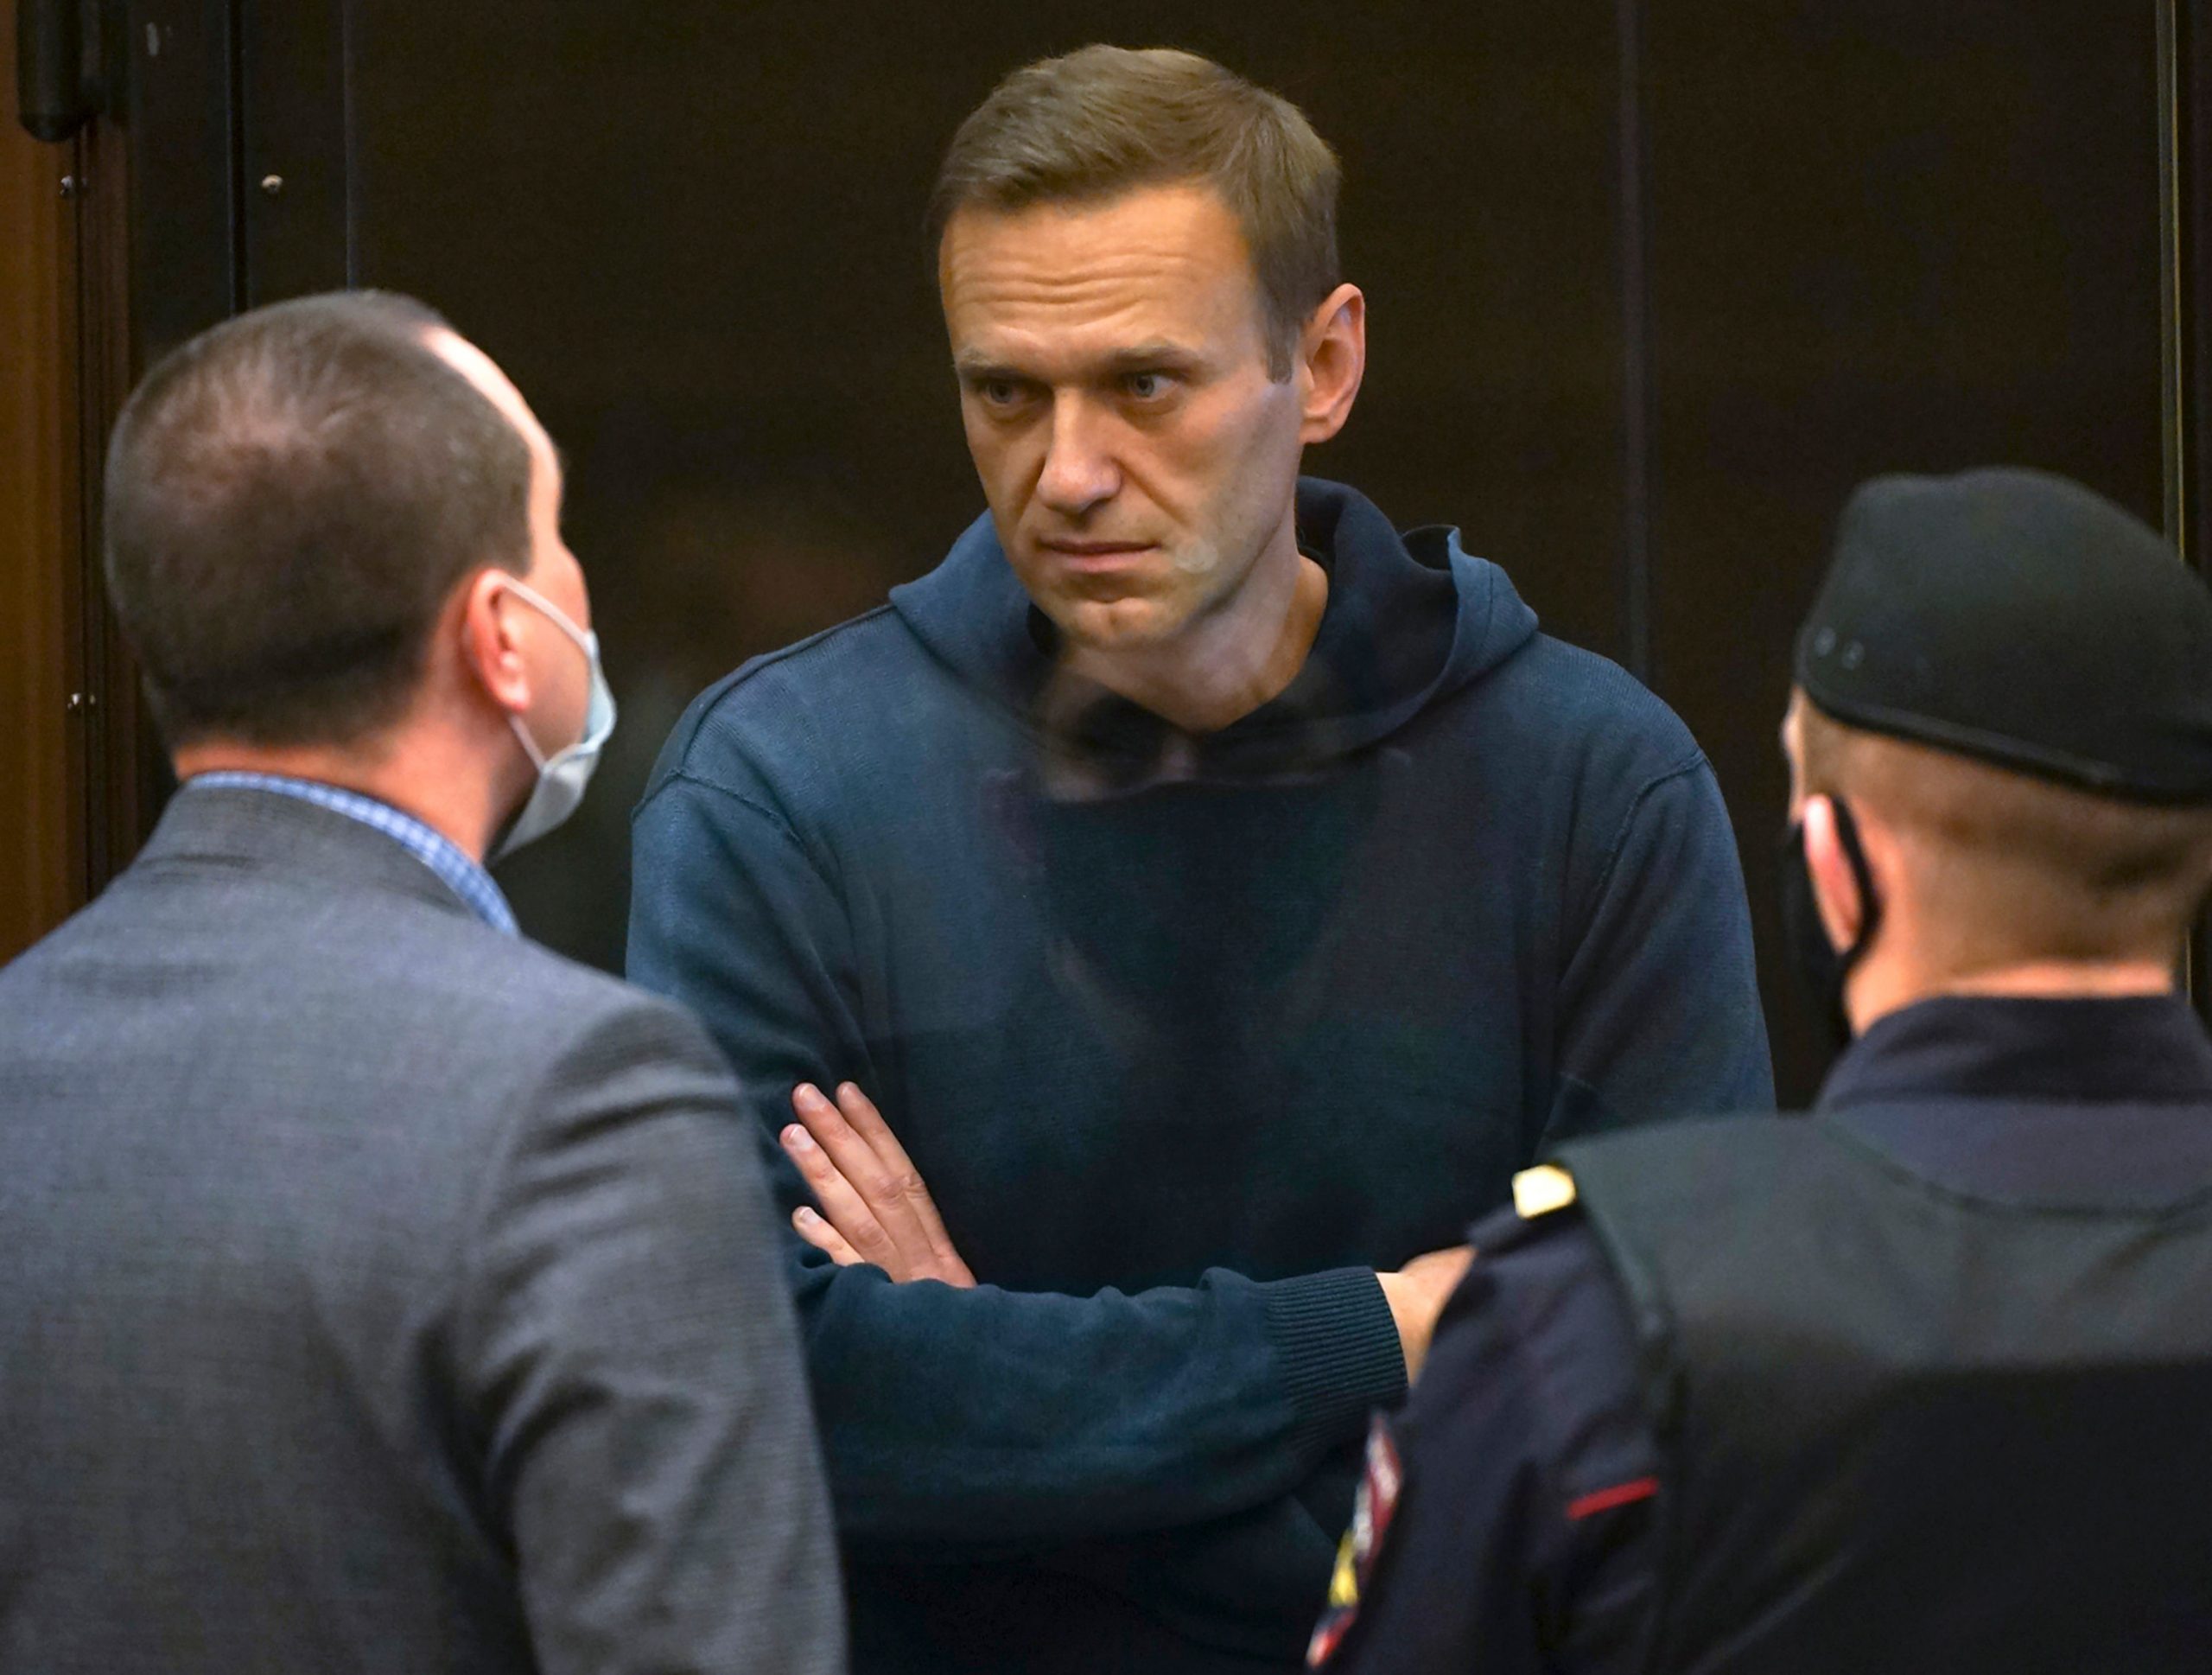 ‘Surprised there is no Ebola virus here’: Kremlin-critic Alexei Navalny on prison conditions